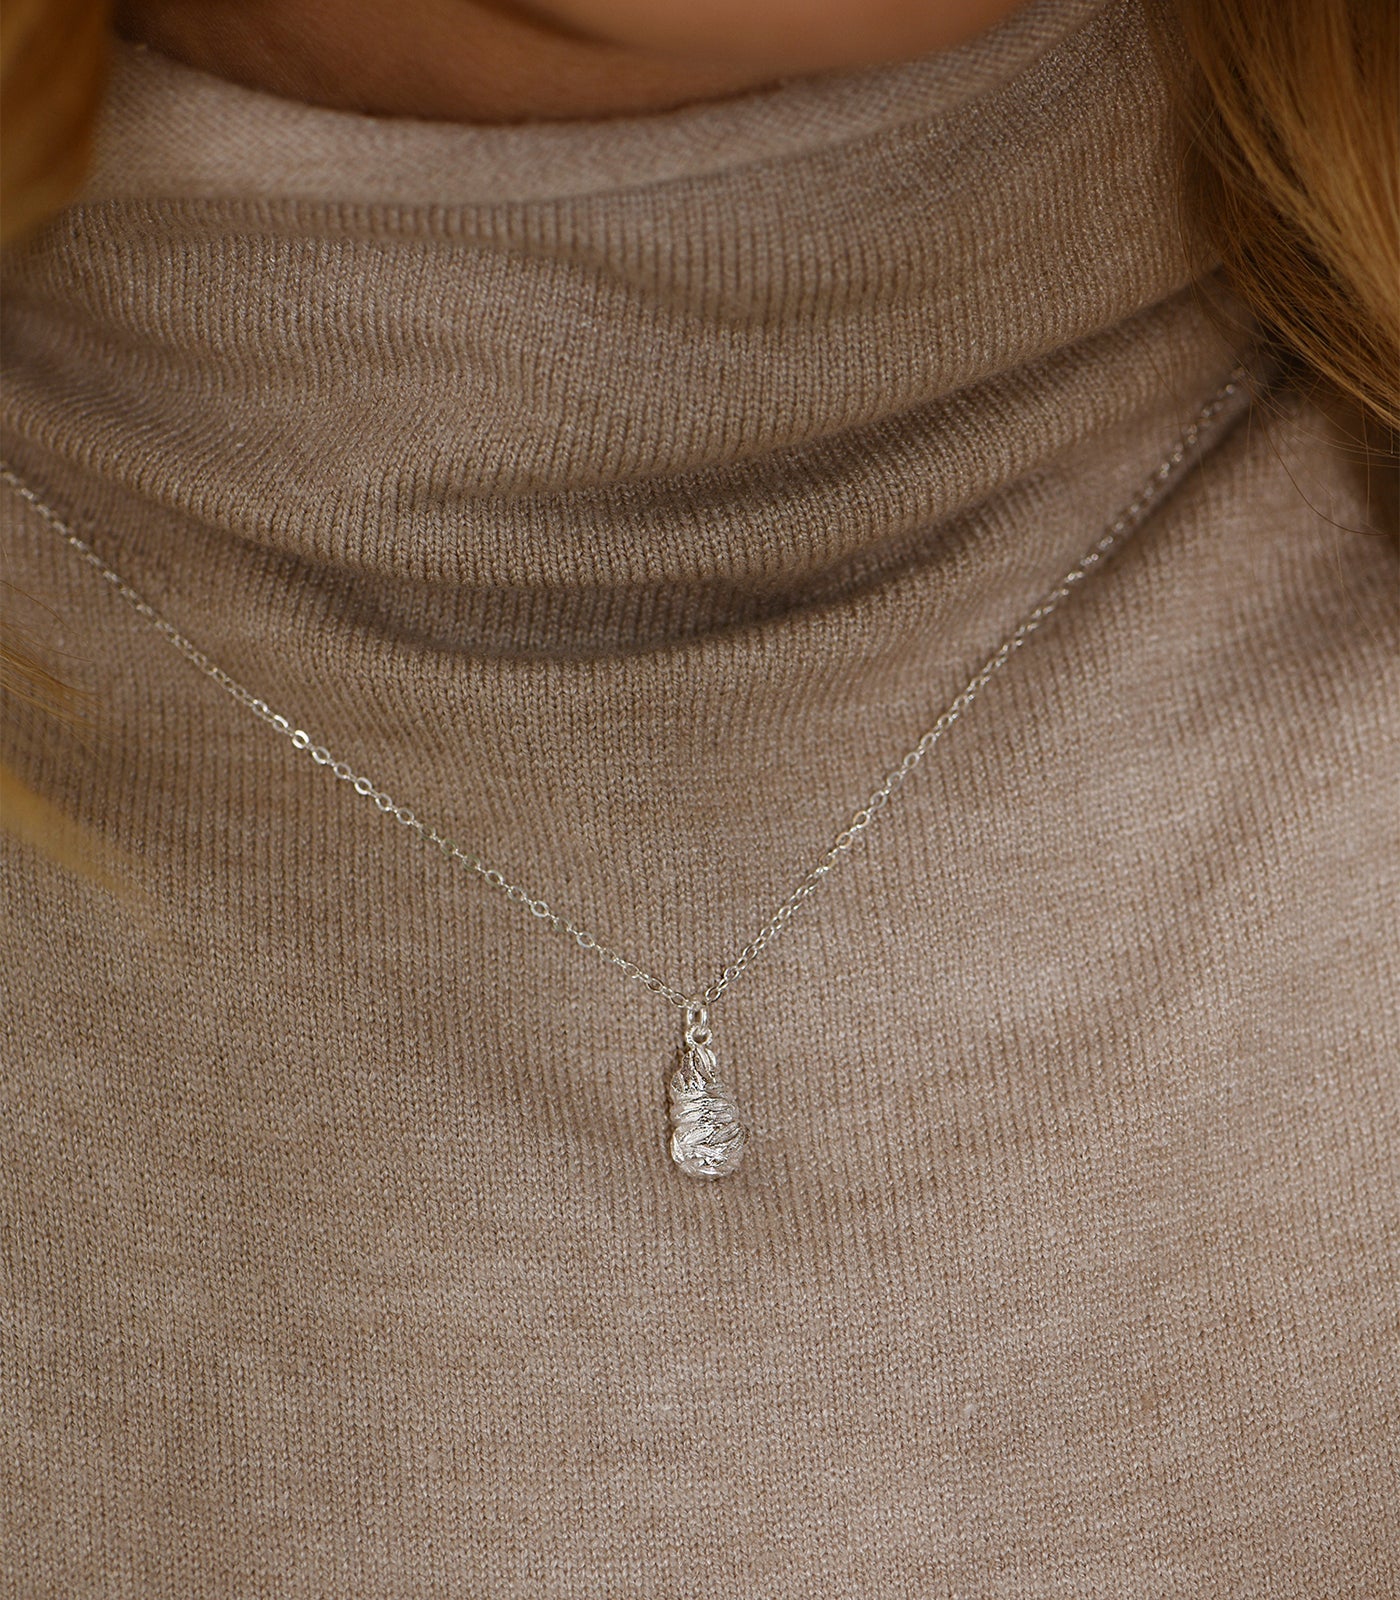 A model wears a sterling silver necklace with a nugget pendant.